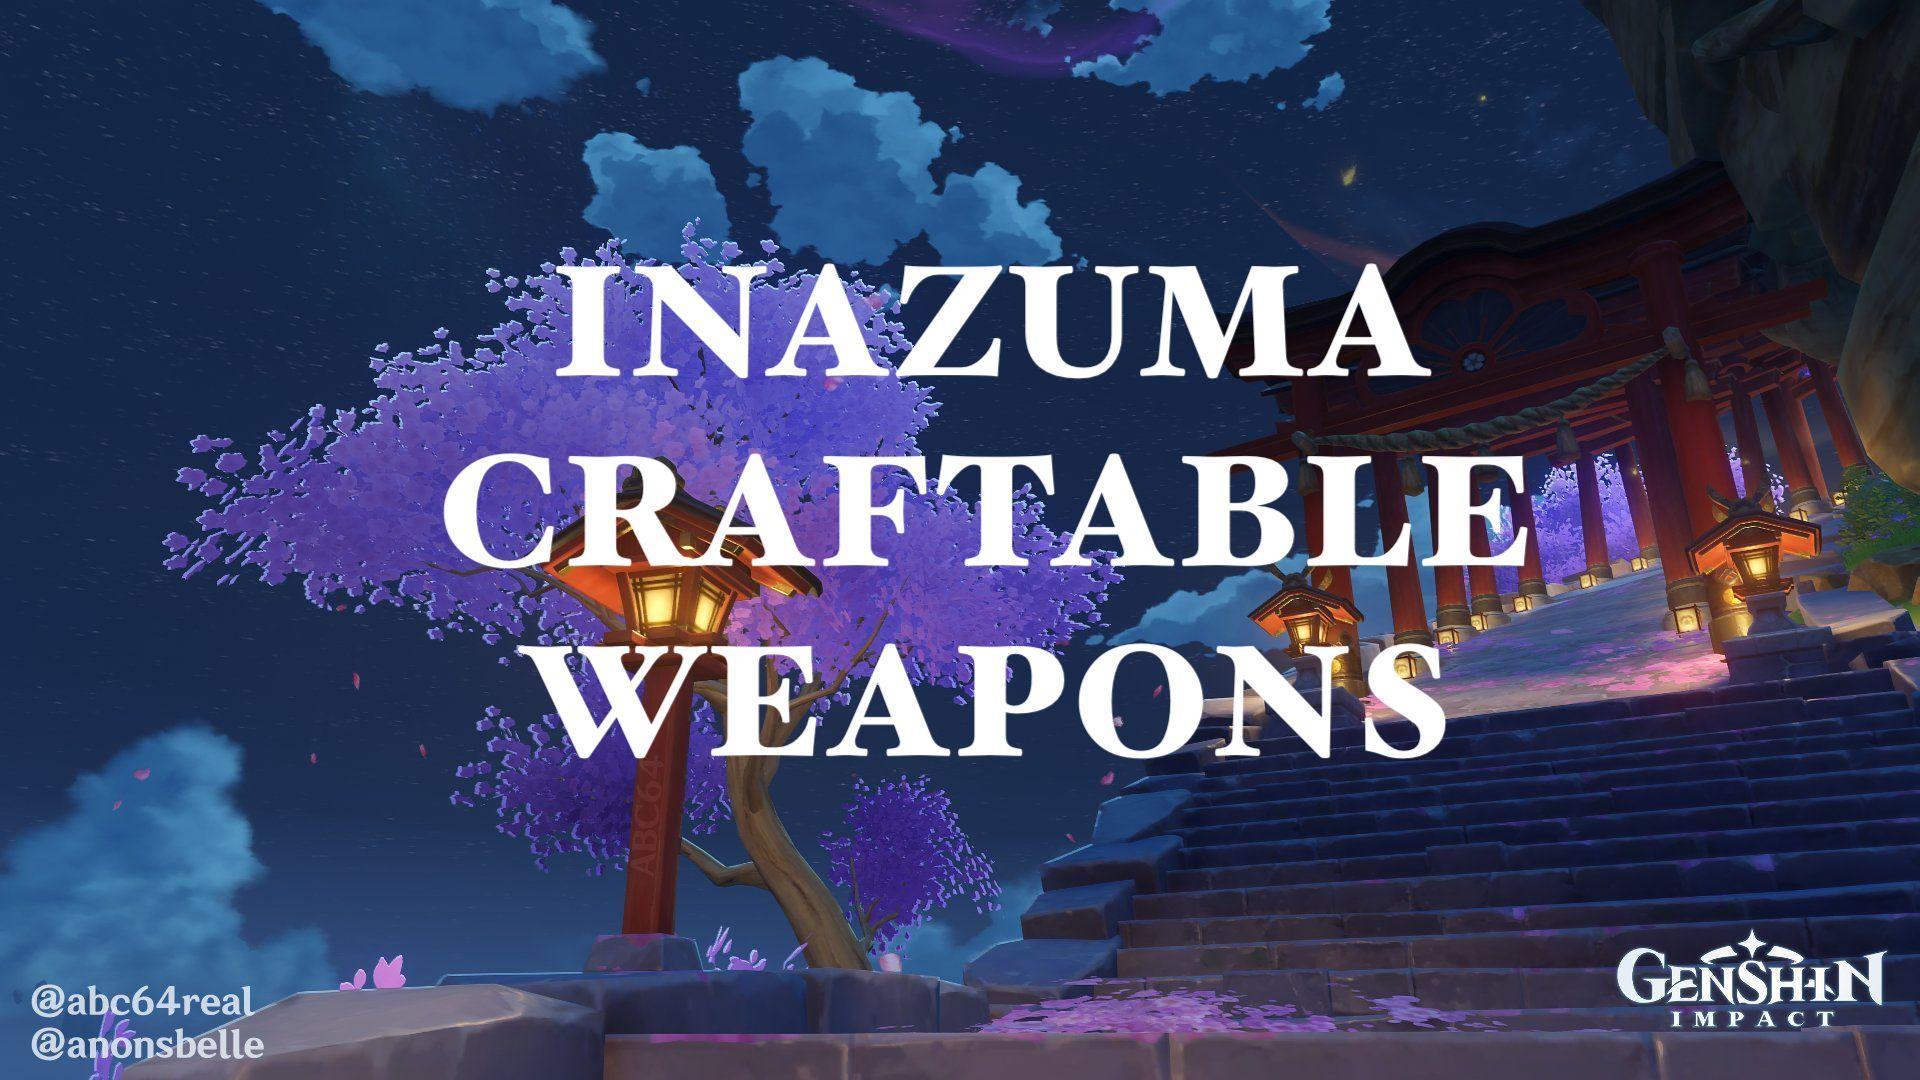 How to get inazuma craftable weapons bow